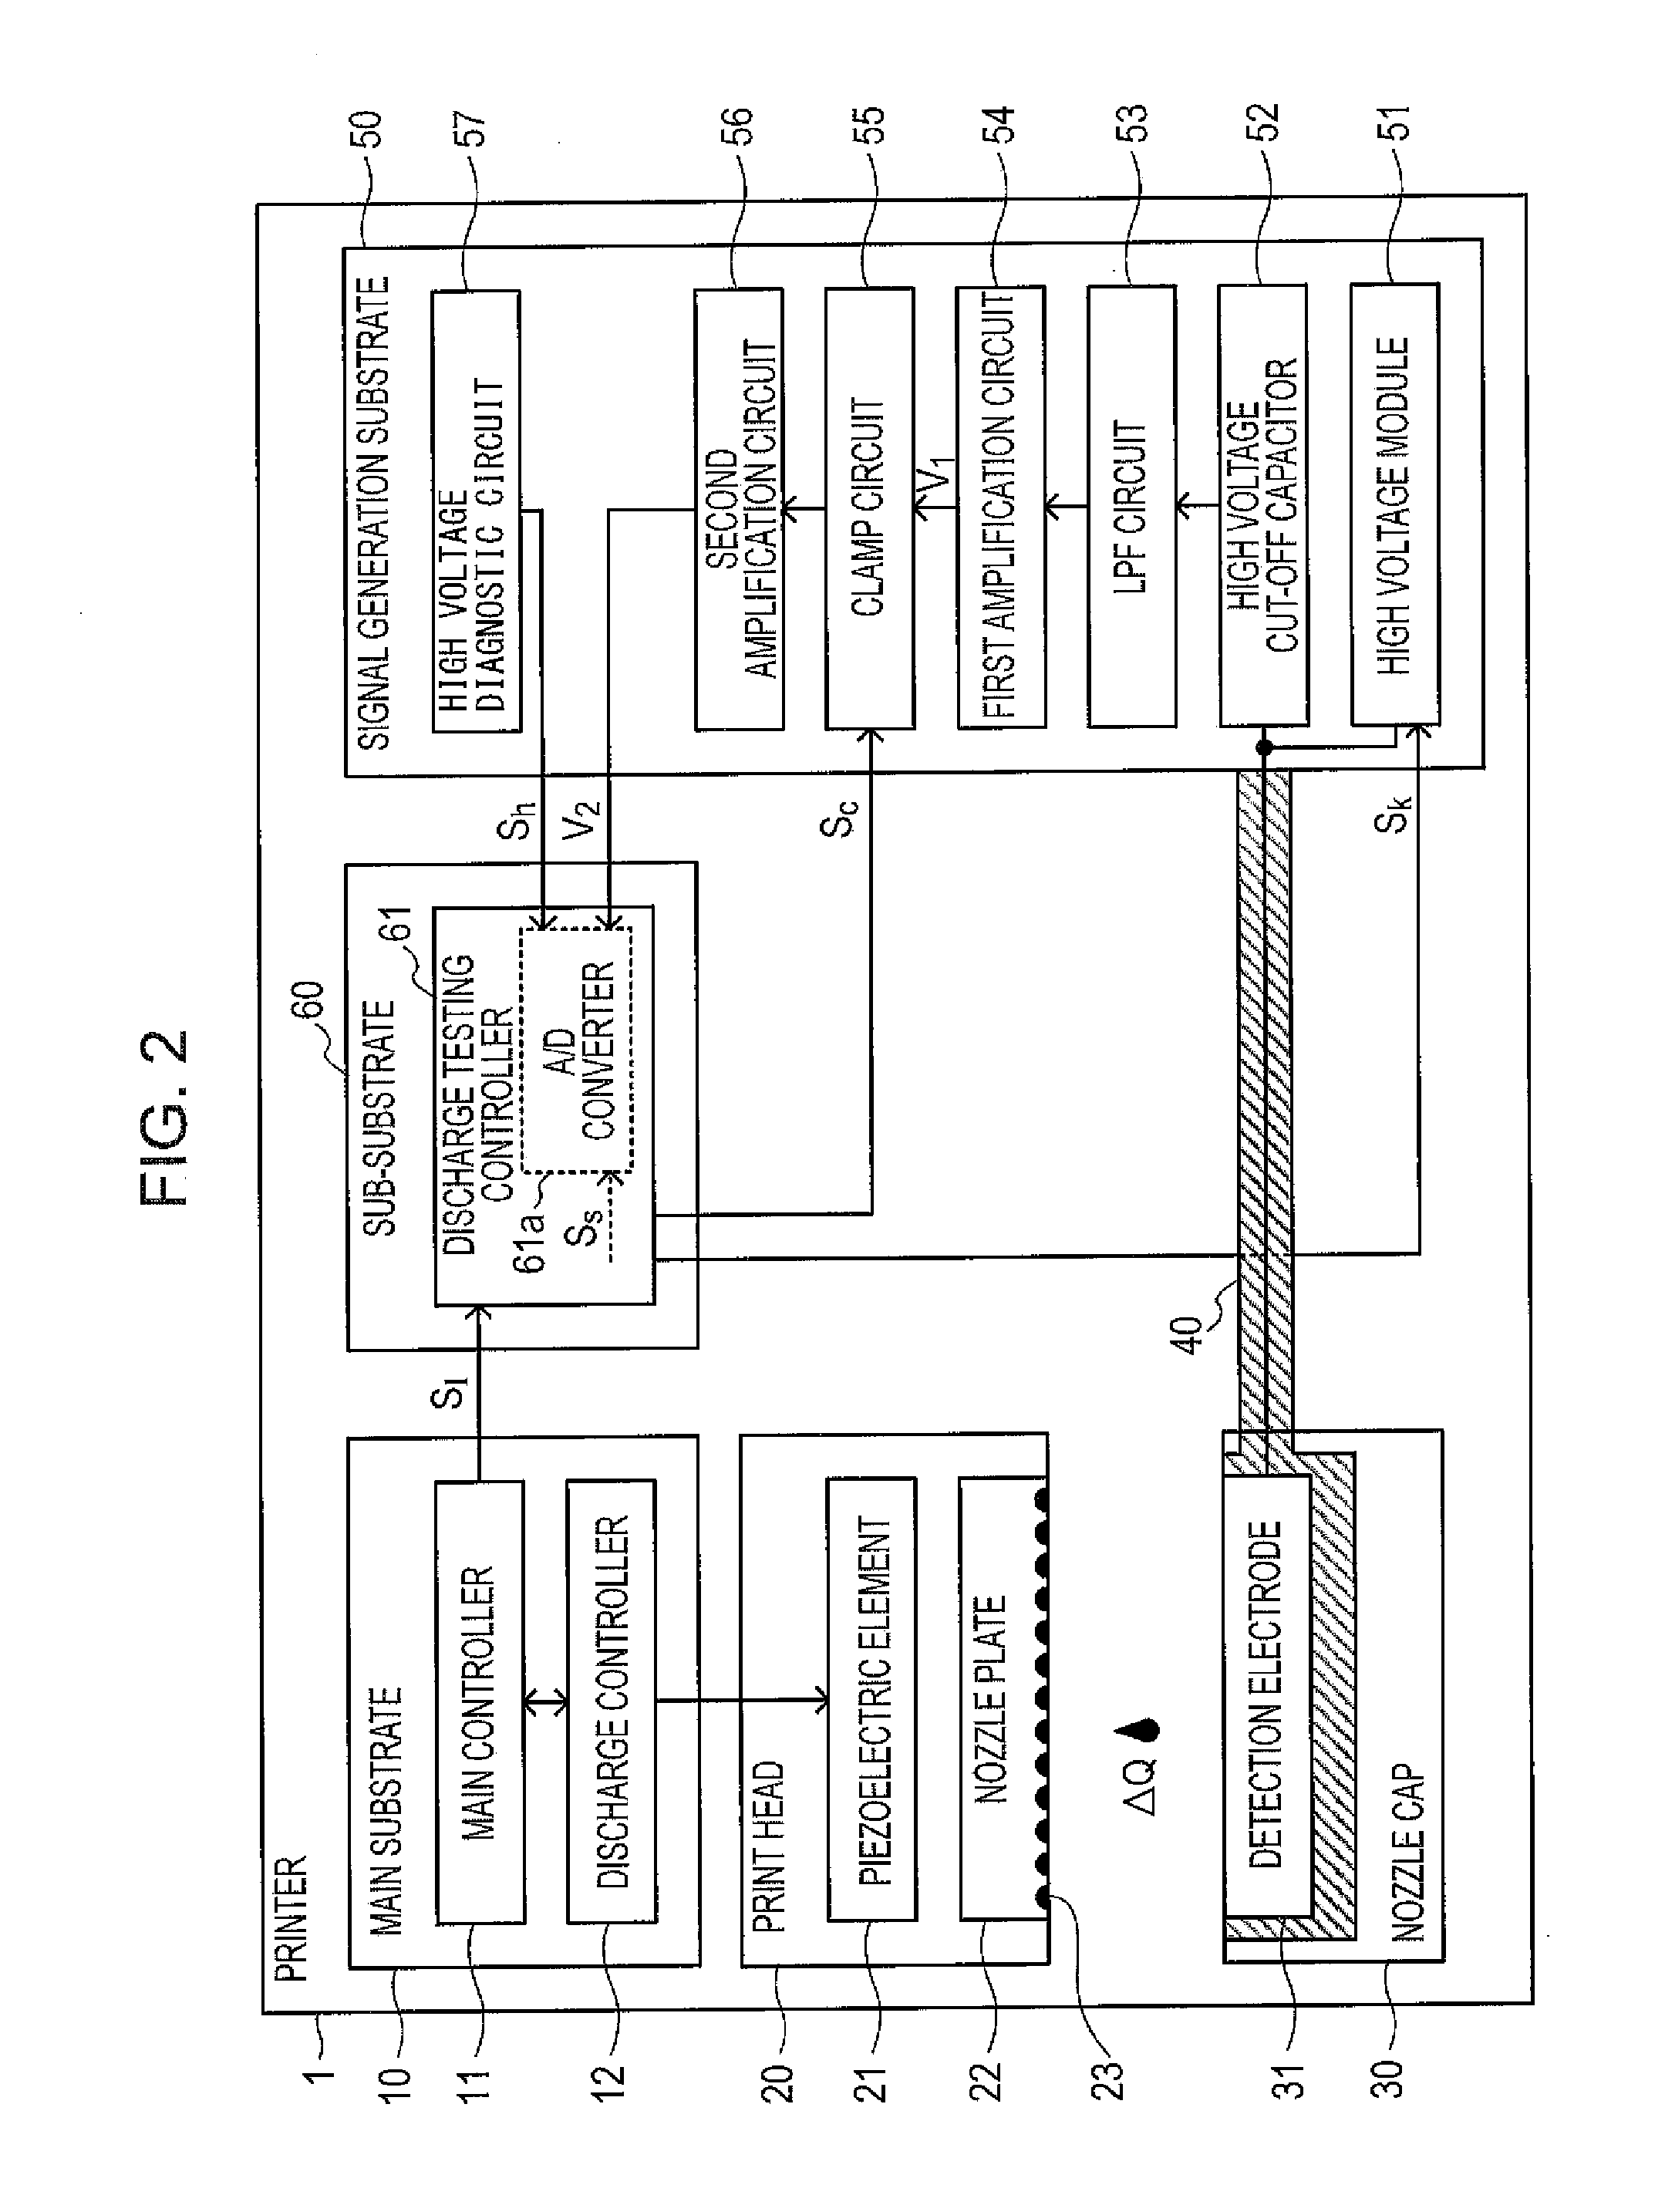 Discharge testing device